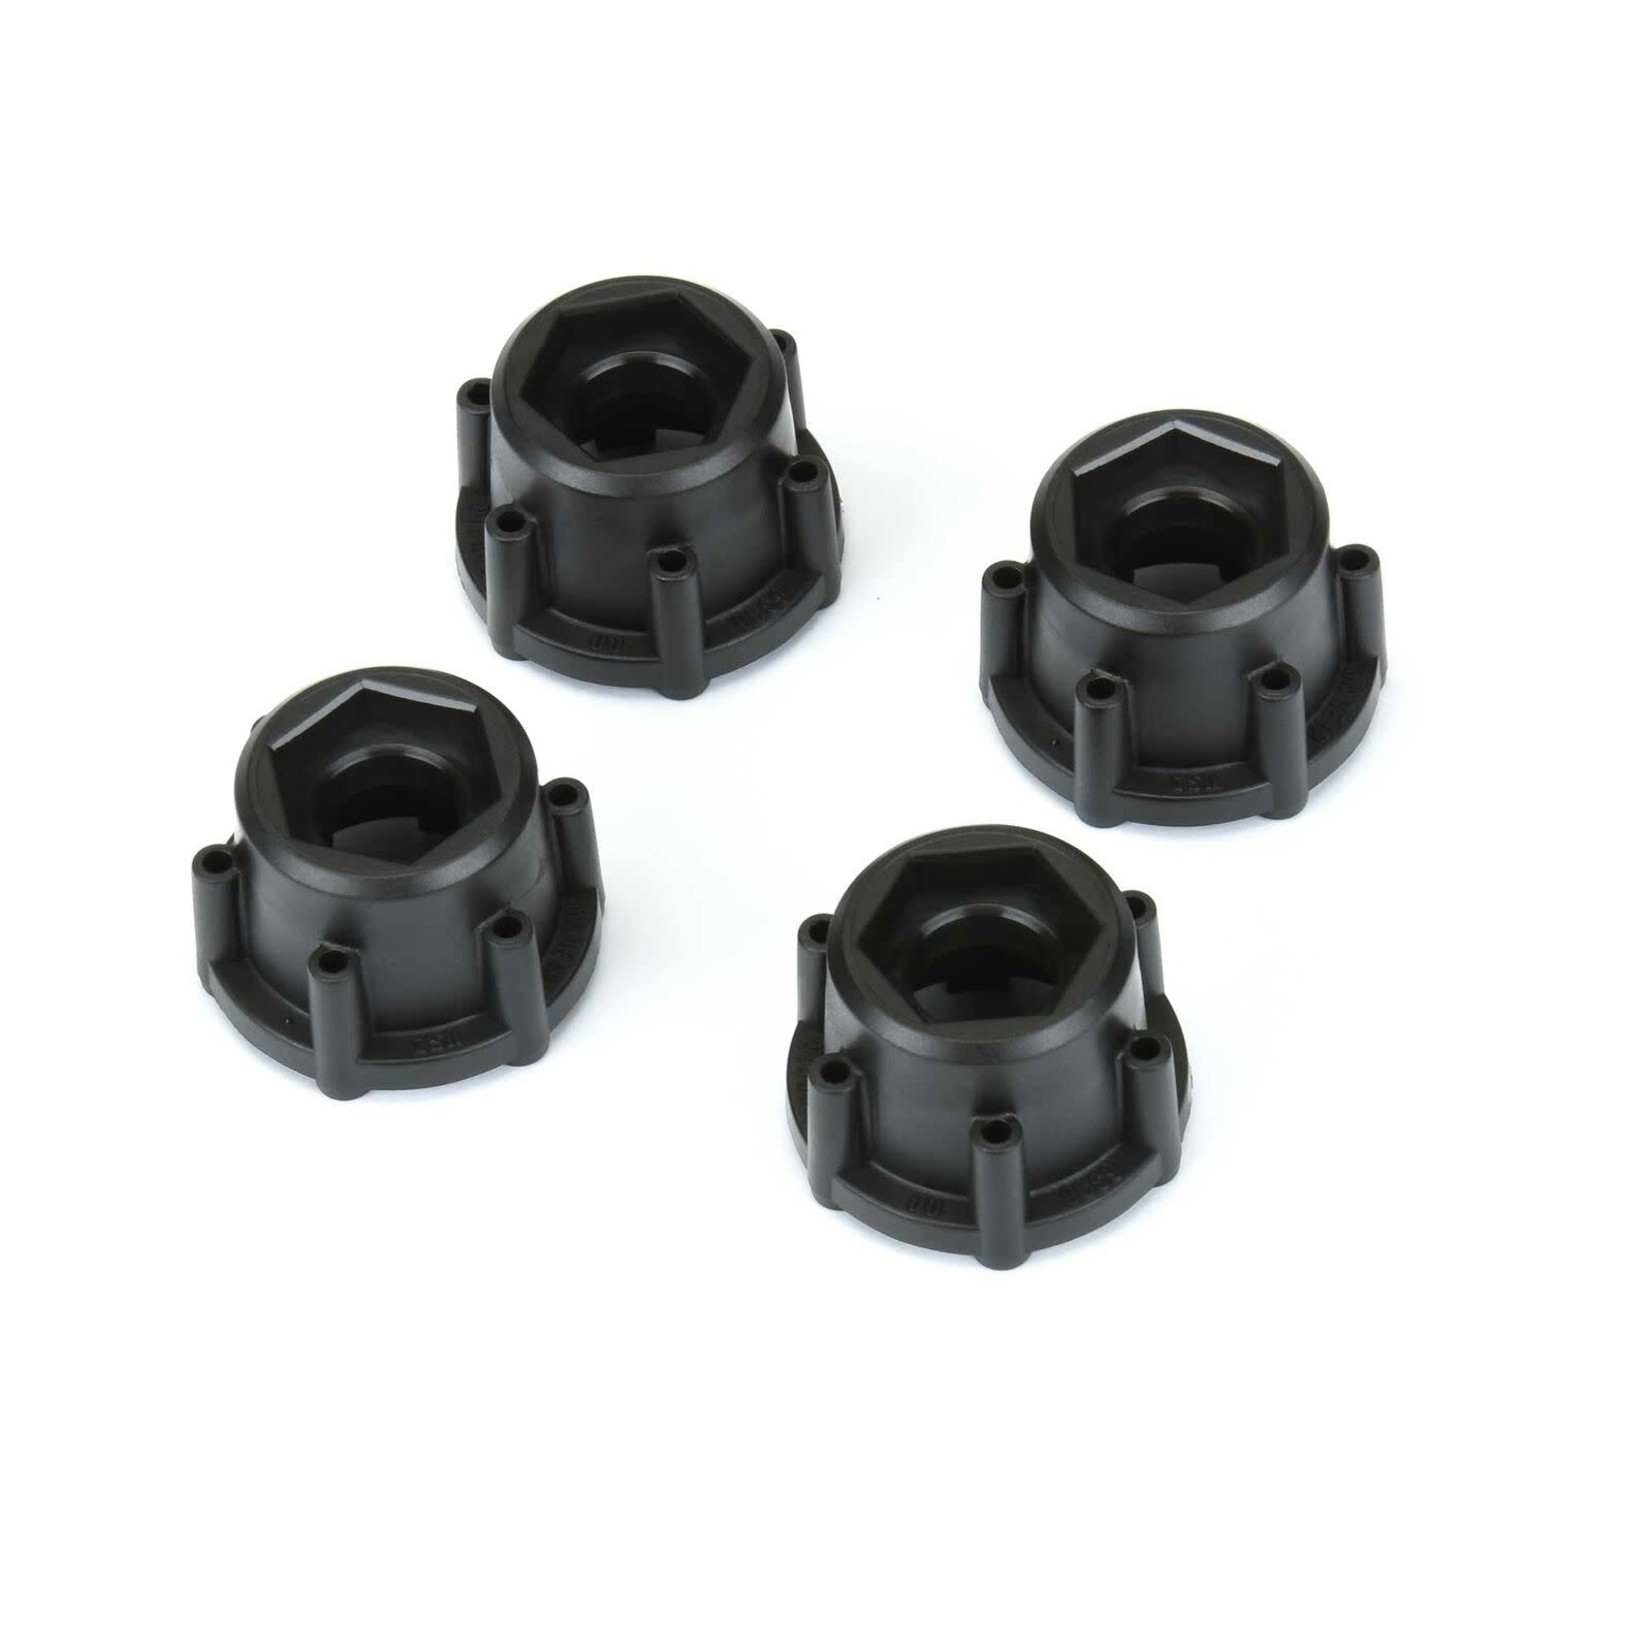 Pro-line Racing PRO633600 Pro-Line 6x30 to 17mm Hex Adapters for 6x30 2.8" Wheels